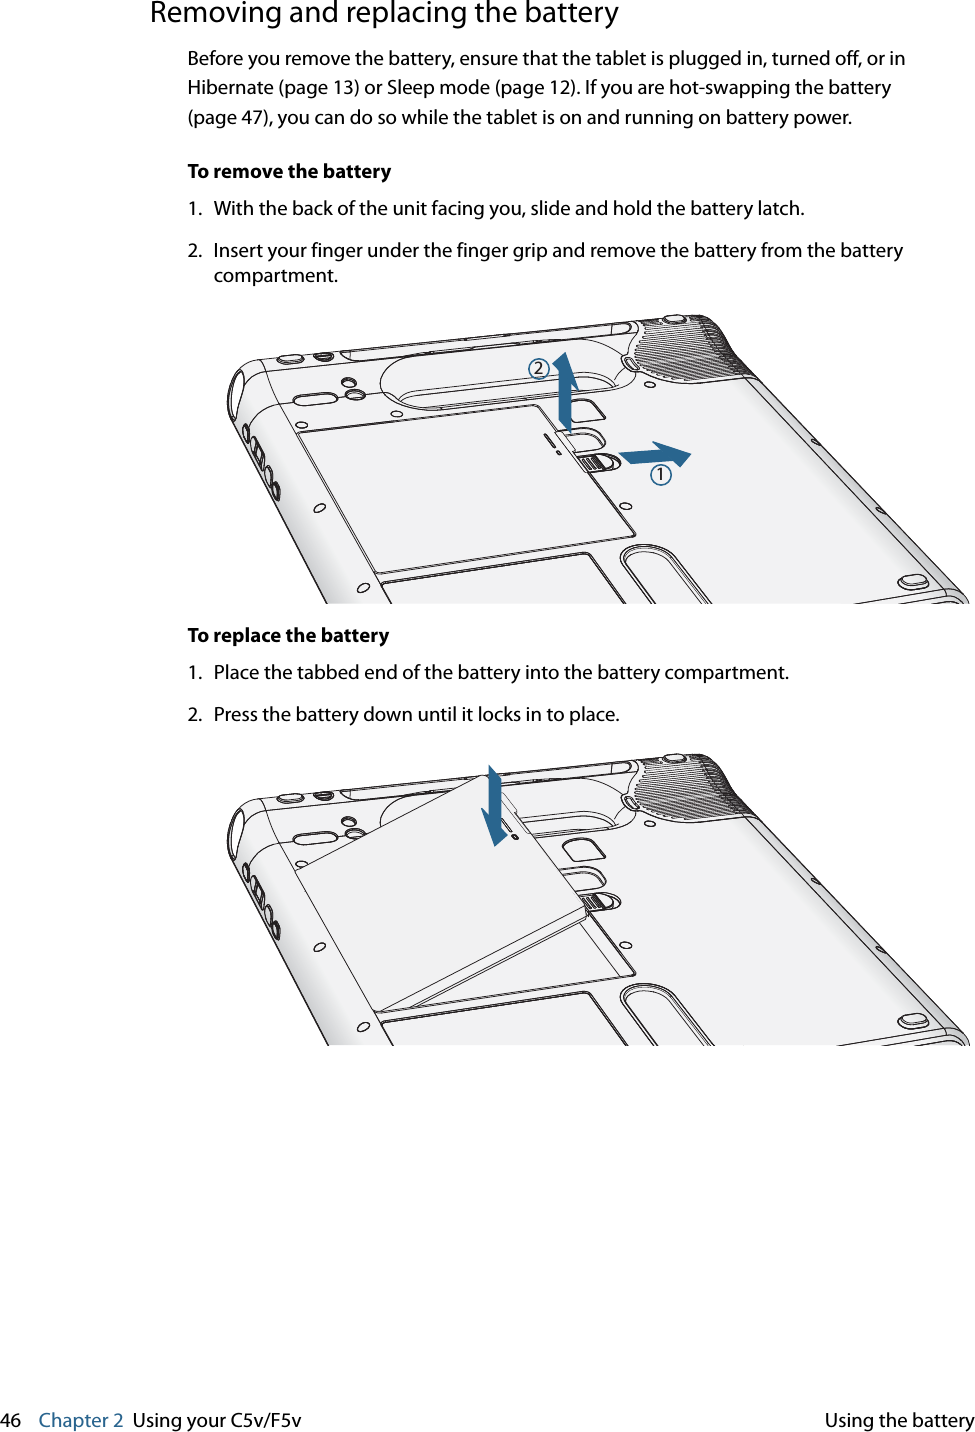 46    Chapter 2 Using your C5v/F5v Using the batteryRemoving and replacing the batteryBefore you remove the battery, ensure that the tablet is plugged in, turned off, or in Hibernate (page 13) or Sleep mode (page 12). If you are hot-swapping the battery (page 47), you can do so while the tablet is on and running on battery power.To remove the battery1. With the back of the unit facing you, slide and hold the battery latch.2. Insert your finger under the finger grip and remove the battery from the battery compartment.To replace the battery1. Place the tabbed end of the battery into the battery compartment.2. Press the battery down until it locks in to place.12